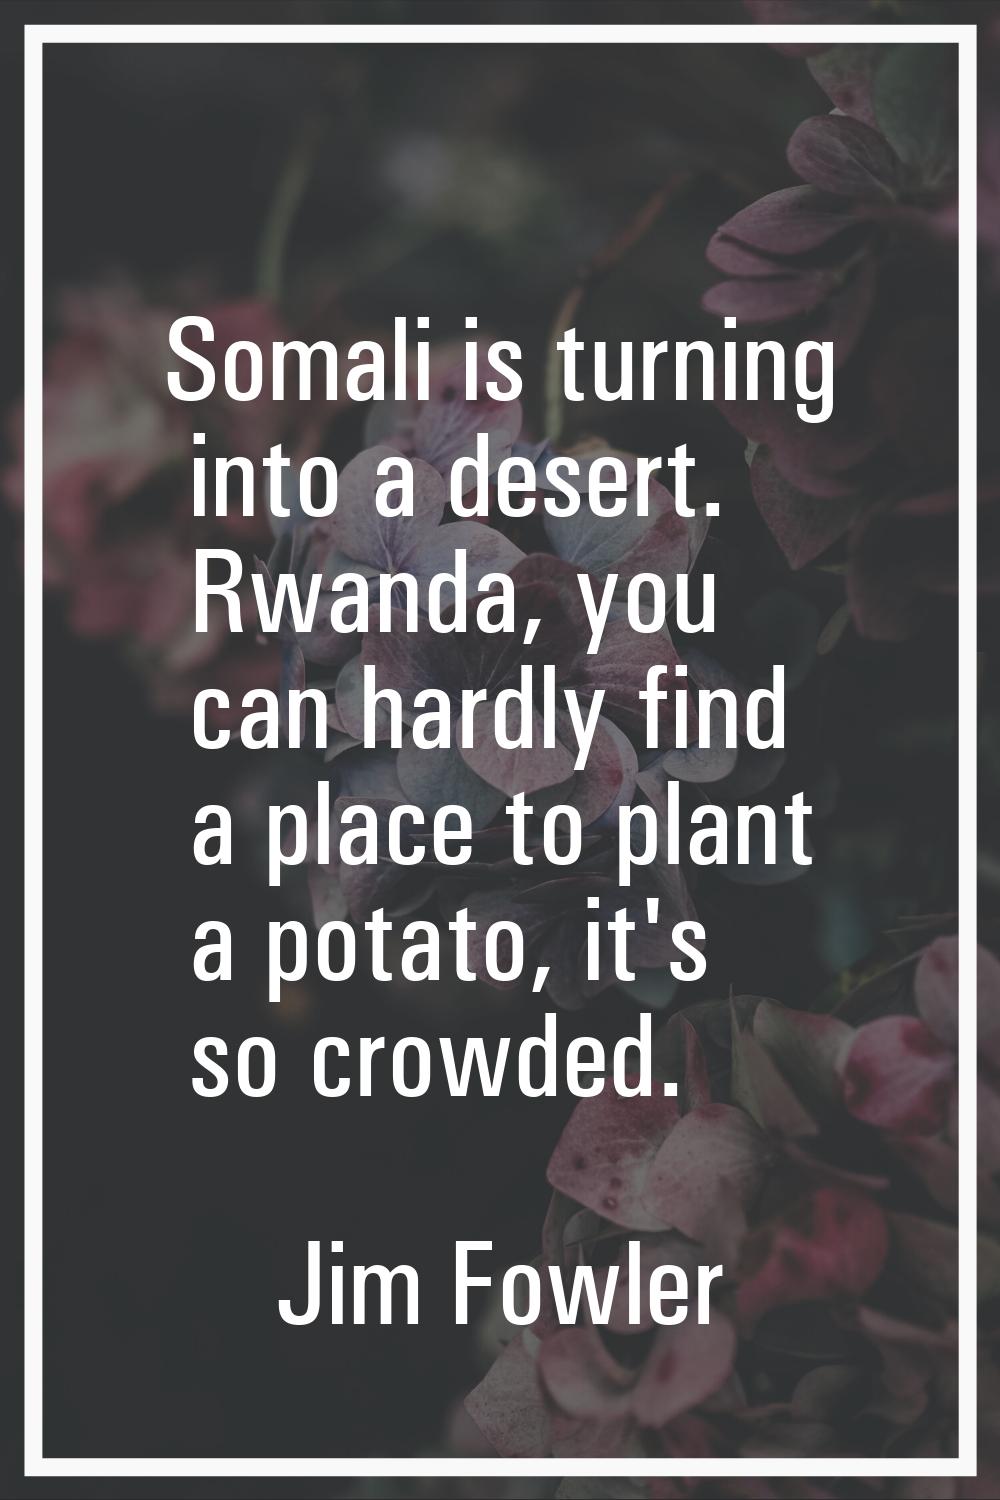 Somali is turning into a desert. Rwanda, you can hardly find a place to plant a potato, it's so cro